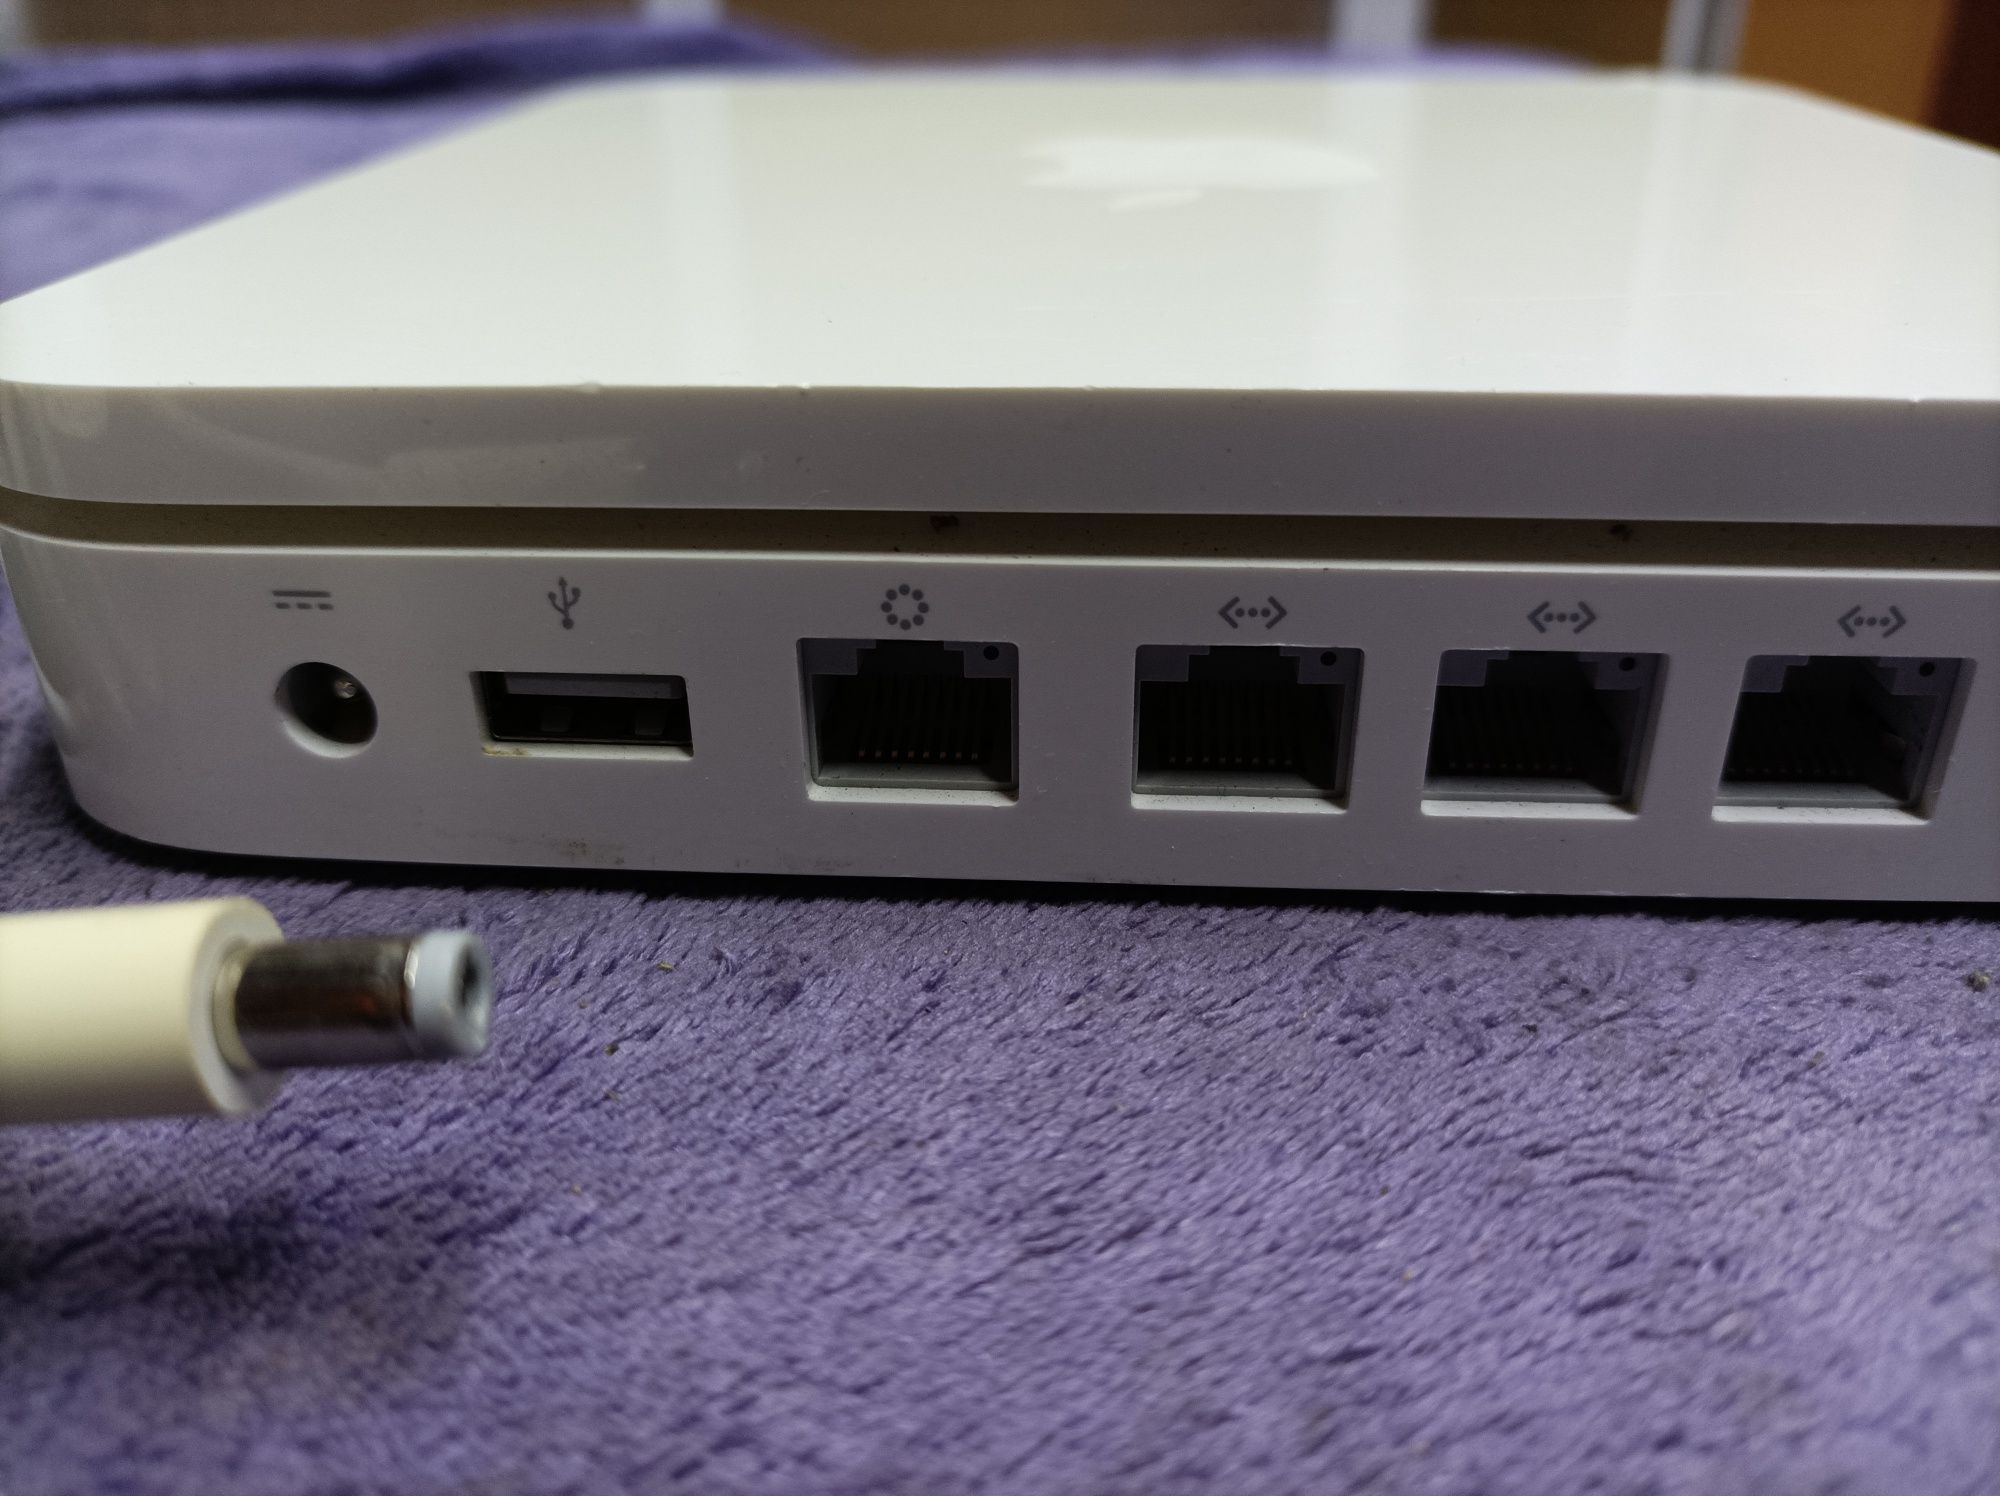 Router wifi Apple Extreme 802.11n. mod.A1408. Tanio!